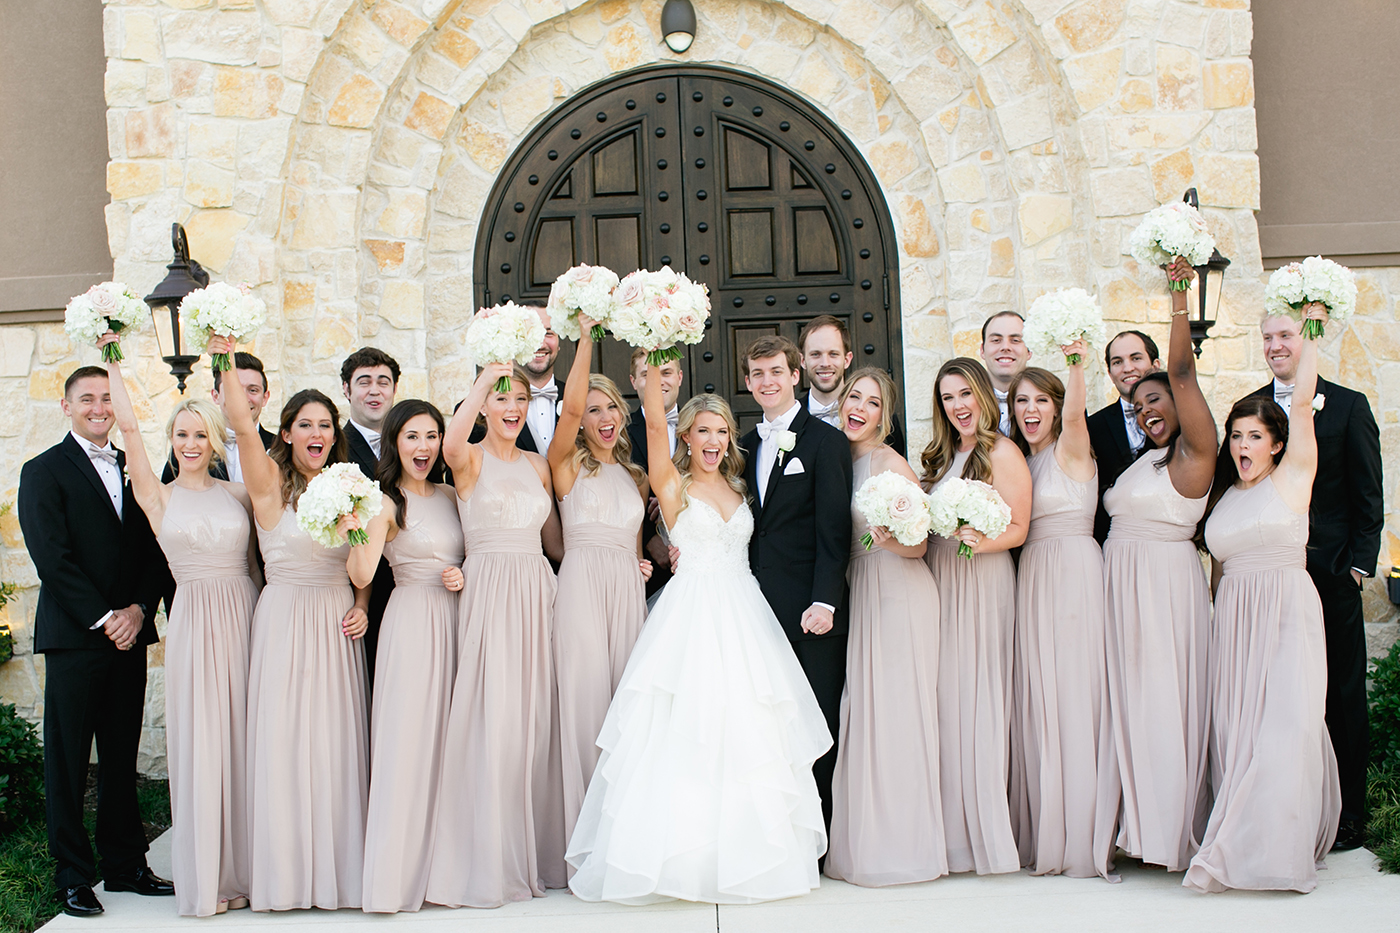 DFW Wedding Planners | A Stylish Soiree - Emily and Dean